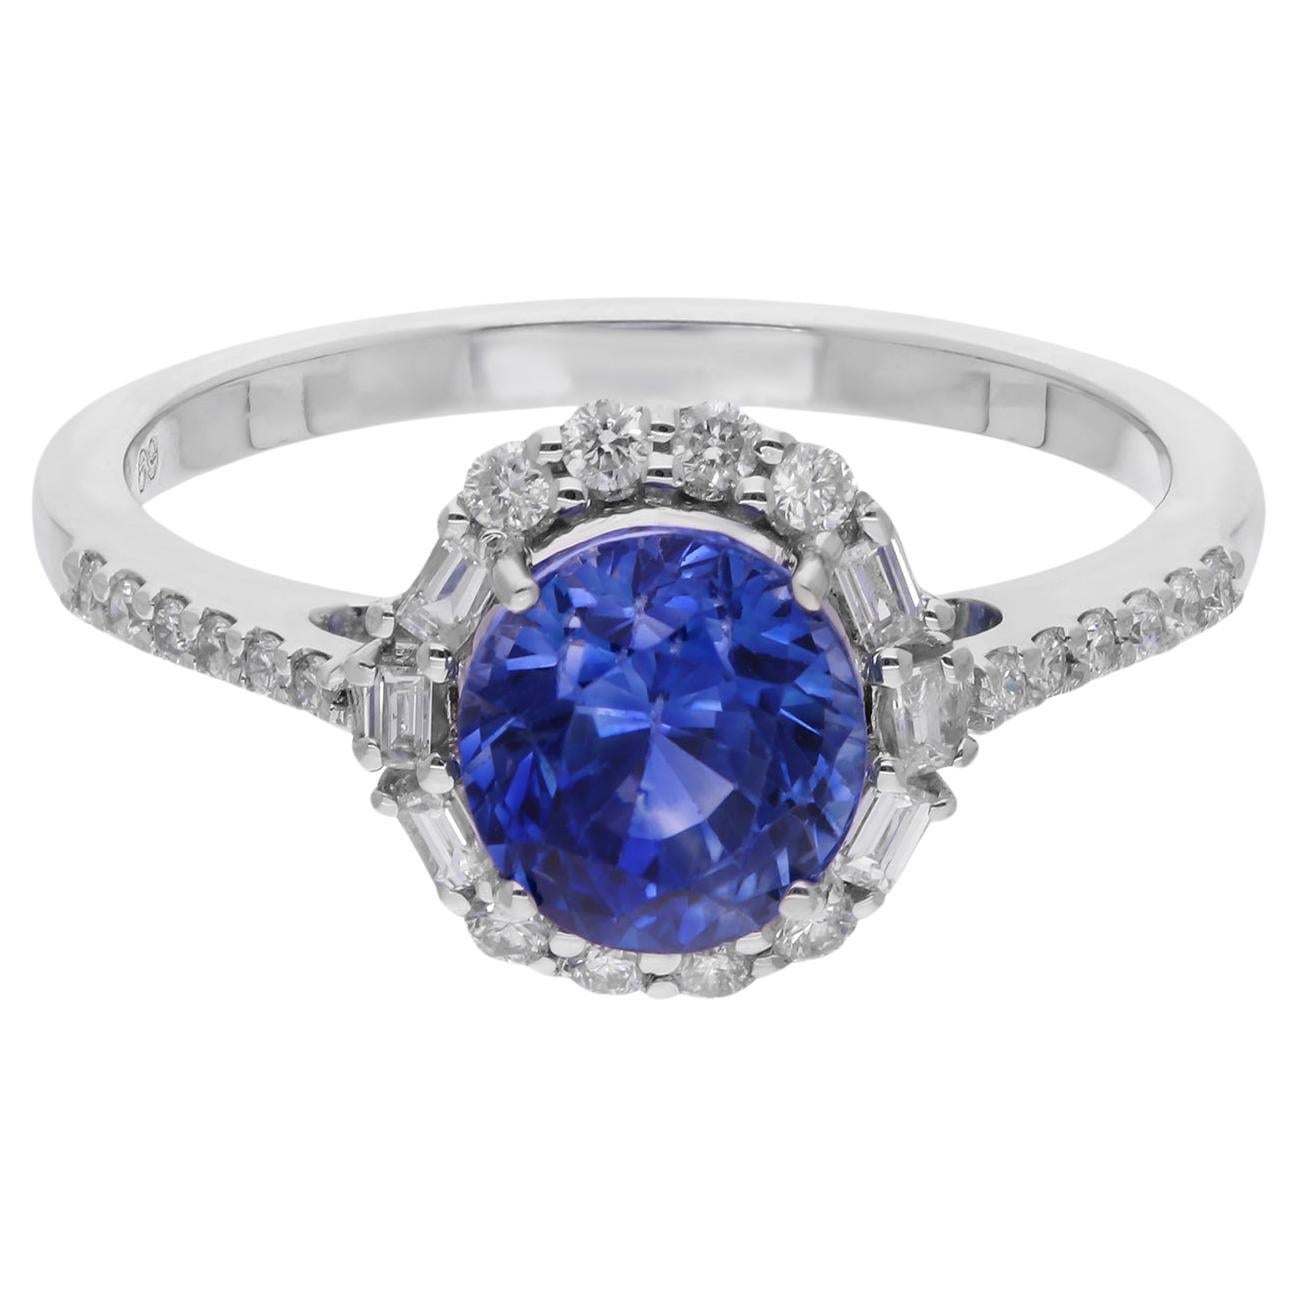 Blue Sapphire Gemstone Cocktail Ring Baguette Diamond 18 Kt White Gold Jewelry For Sale